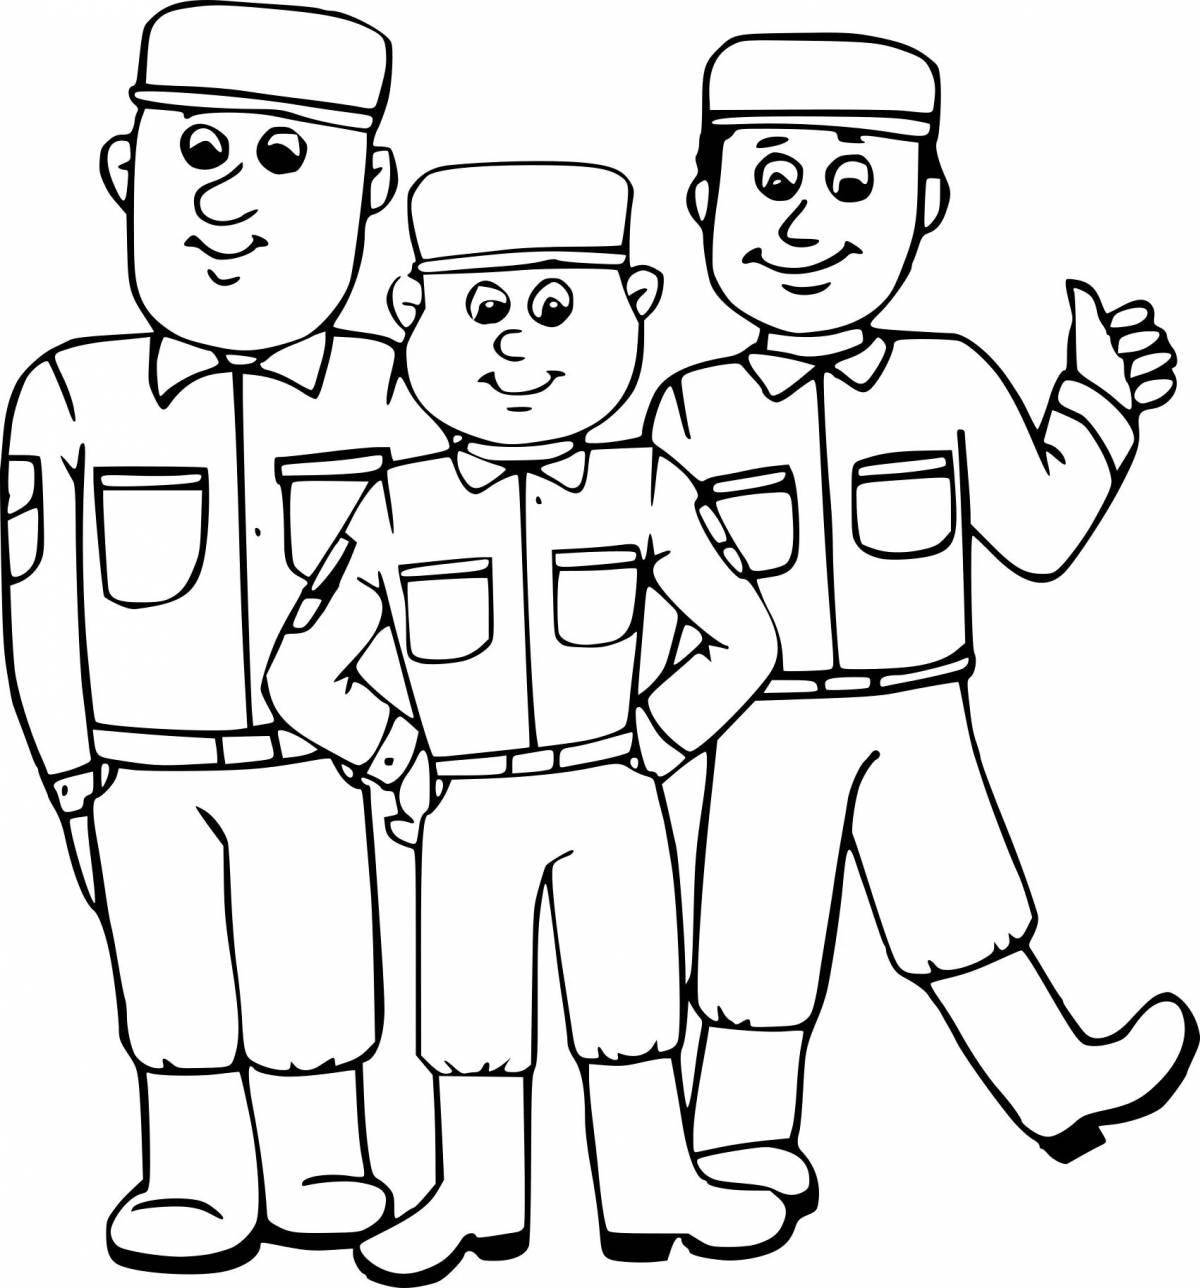 Wonderful military profession coloring book for beginners